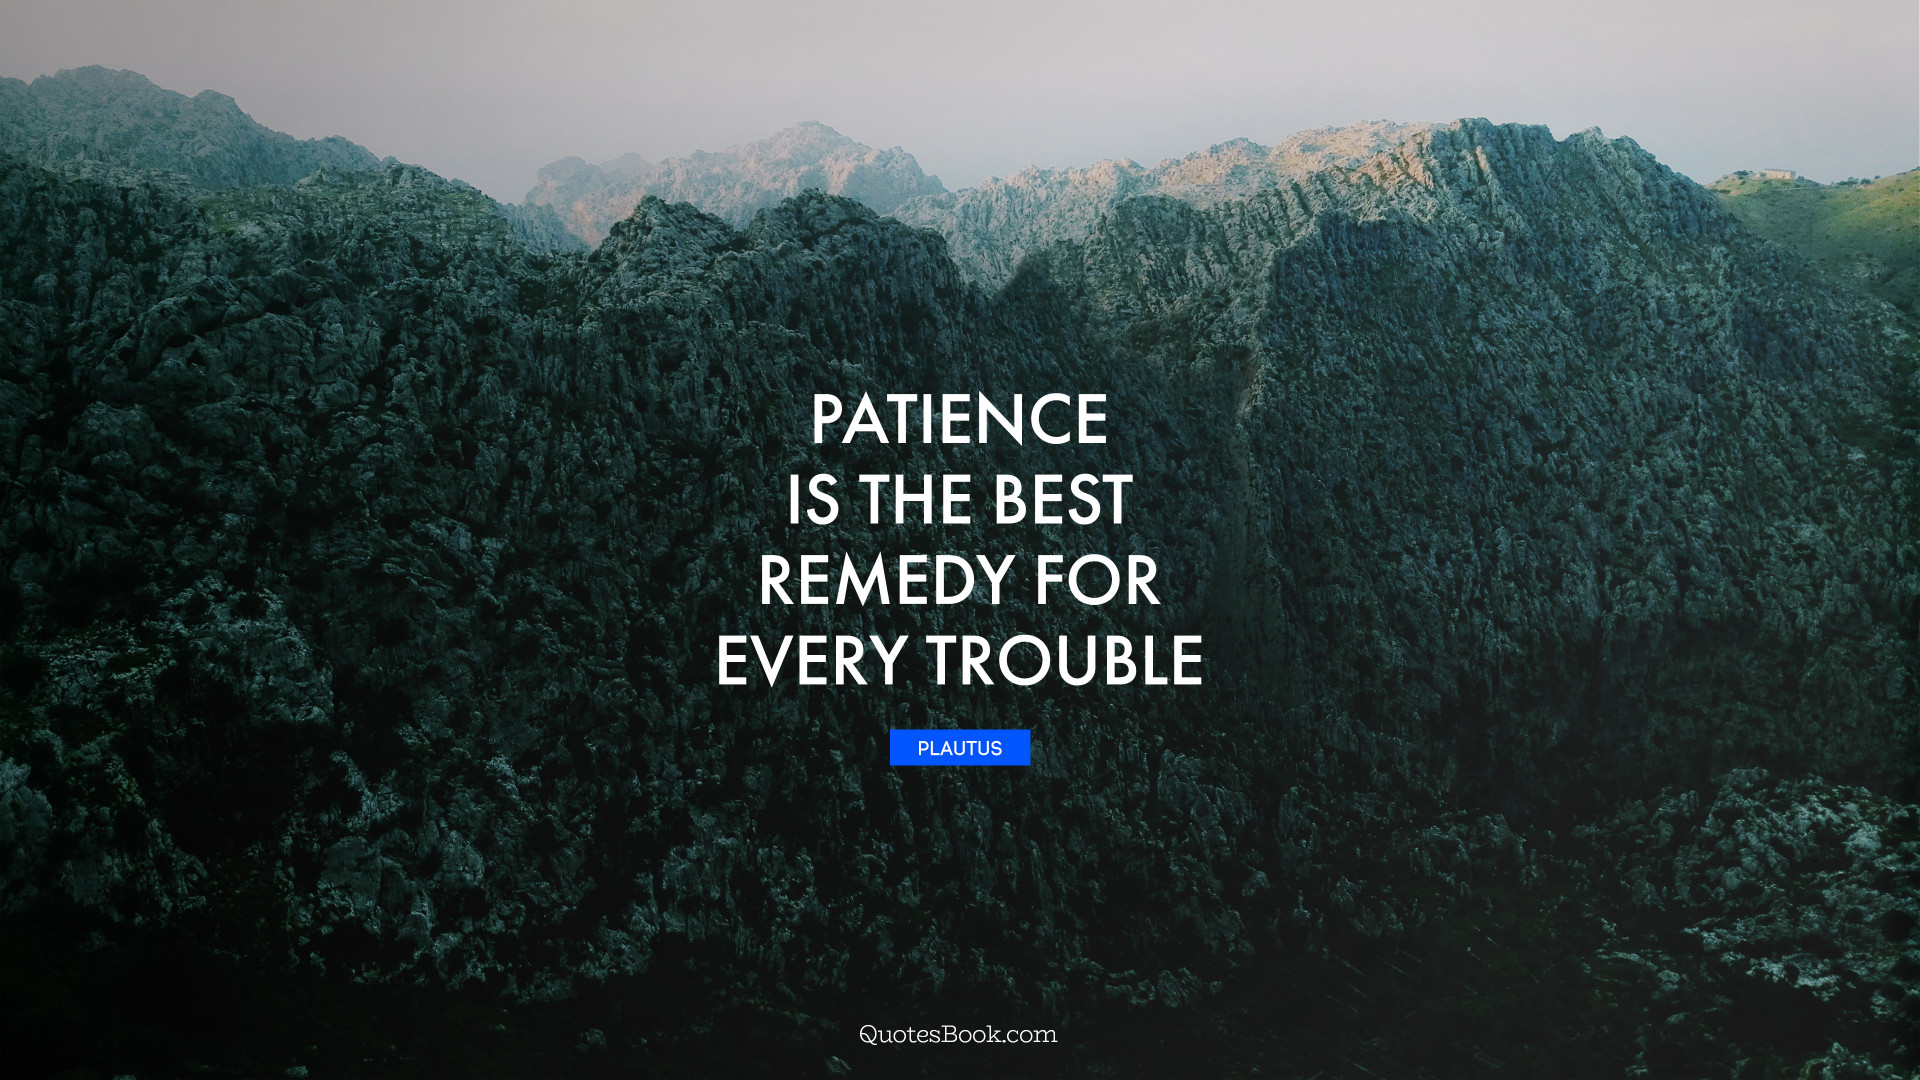 Patience is the best remedy for every trouble. Quote by